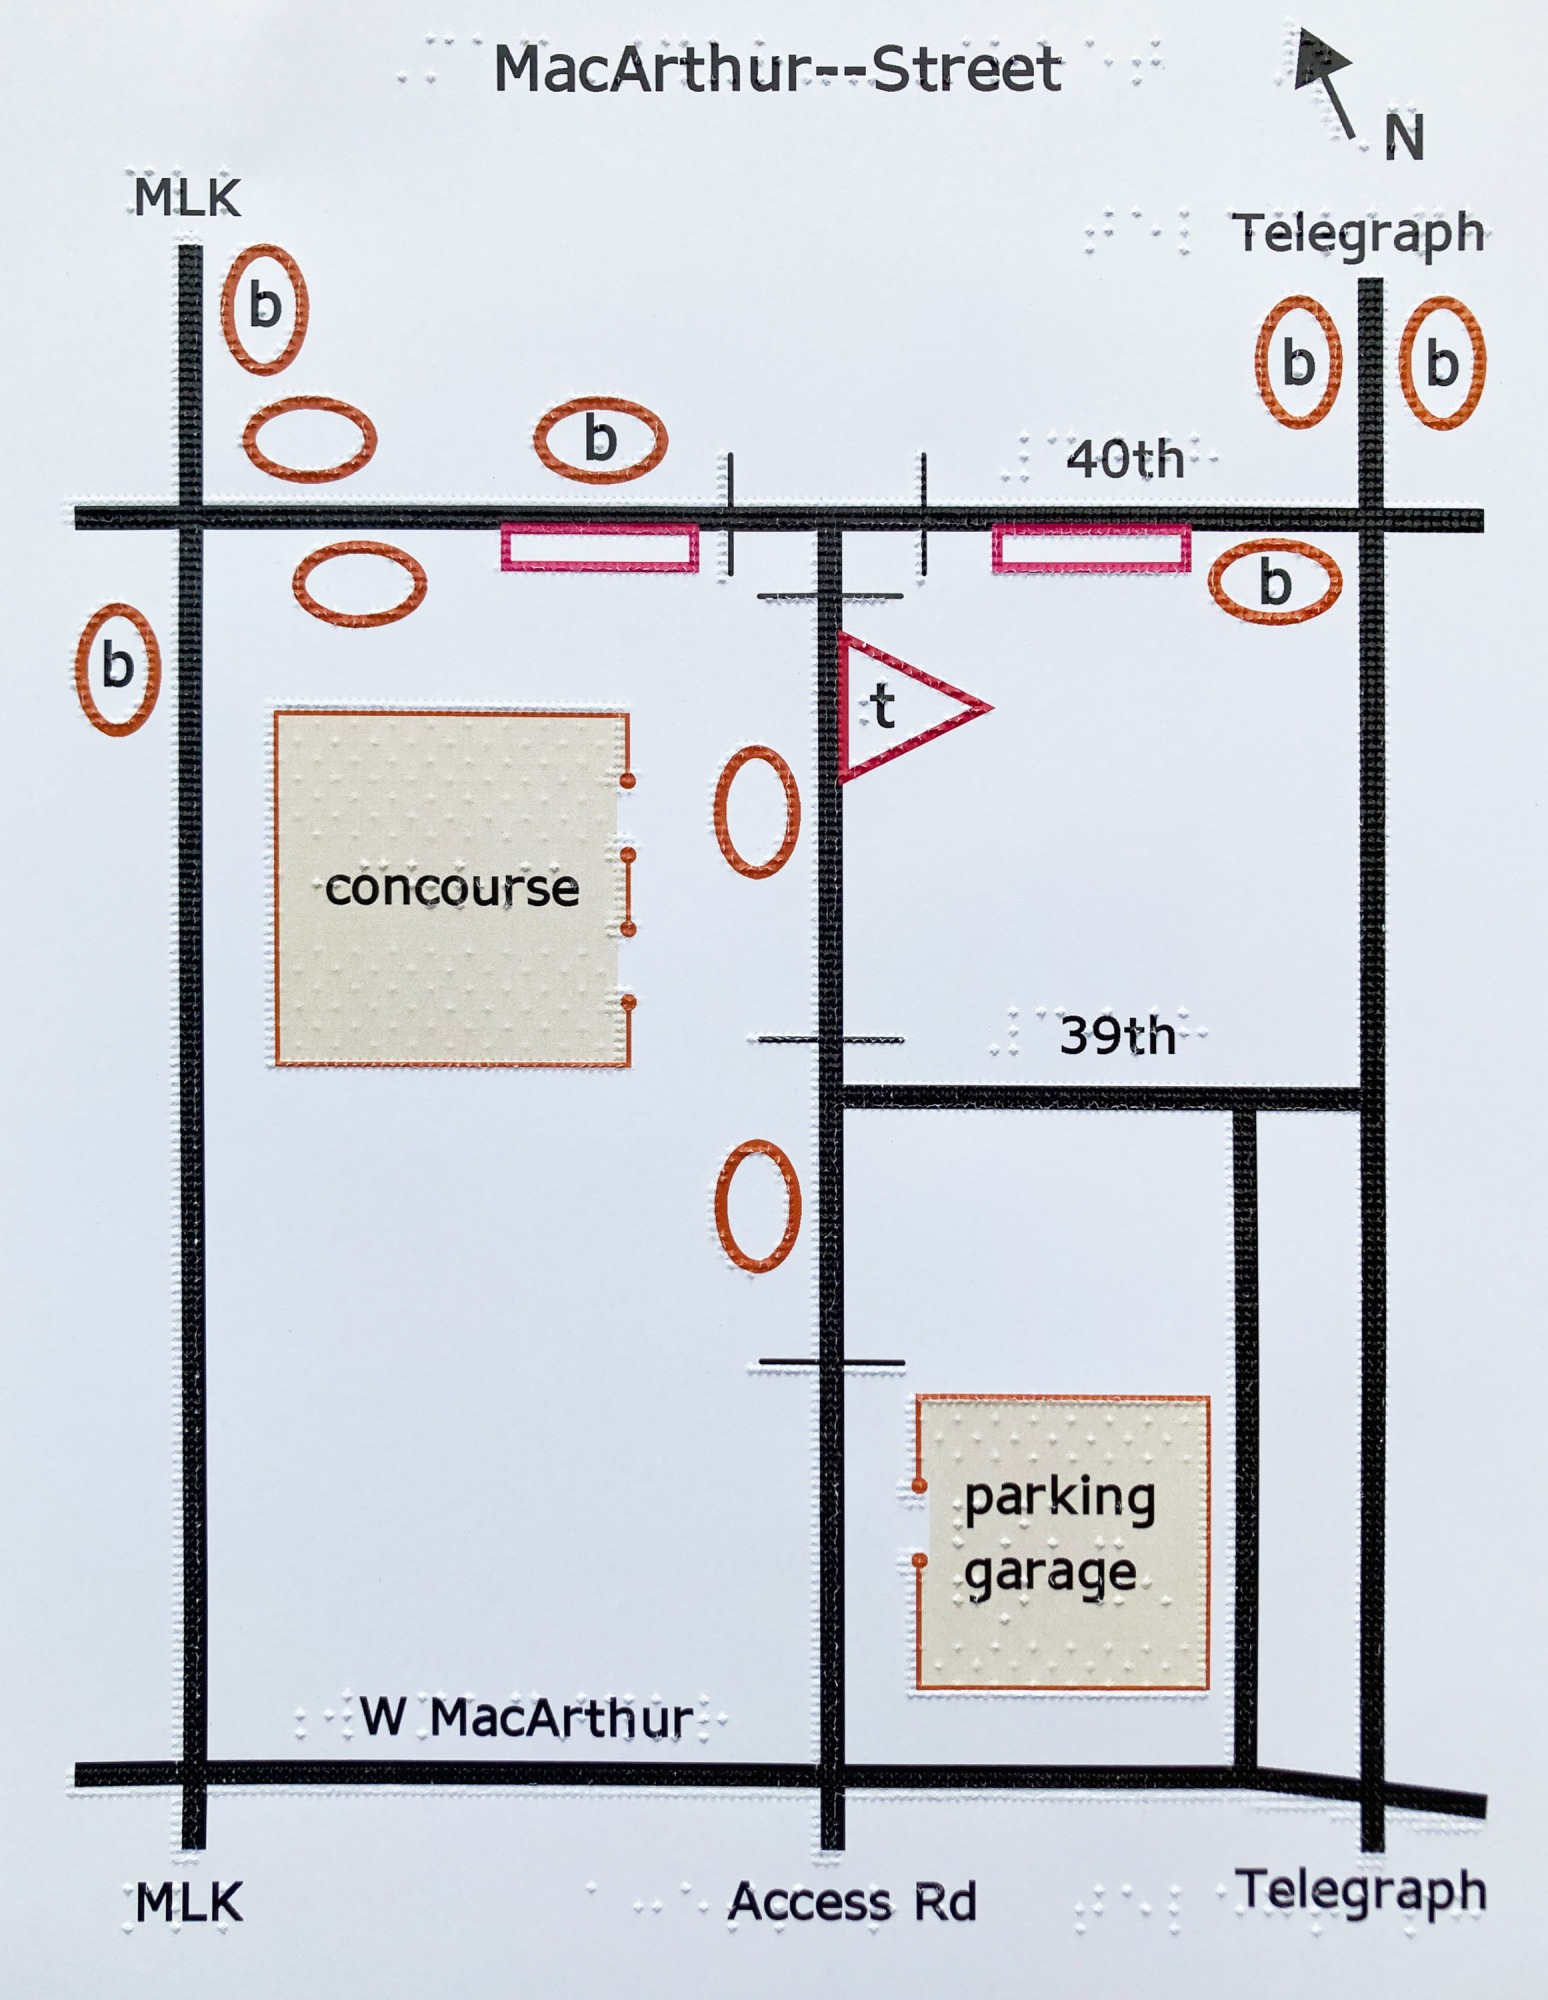 a map entitled "MacArthur--Street" showing the concourse and a parking garage between MLK and Telegraph.